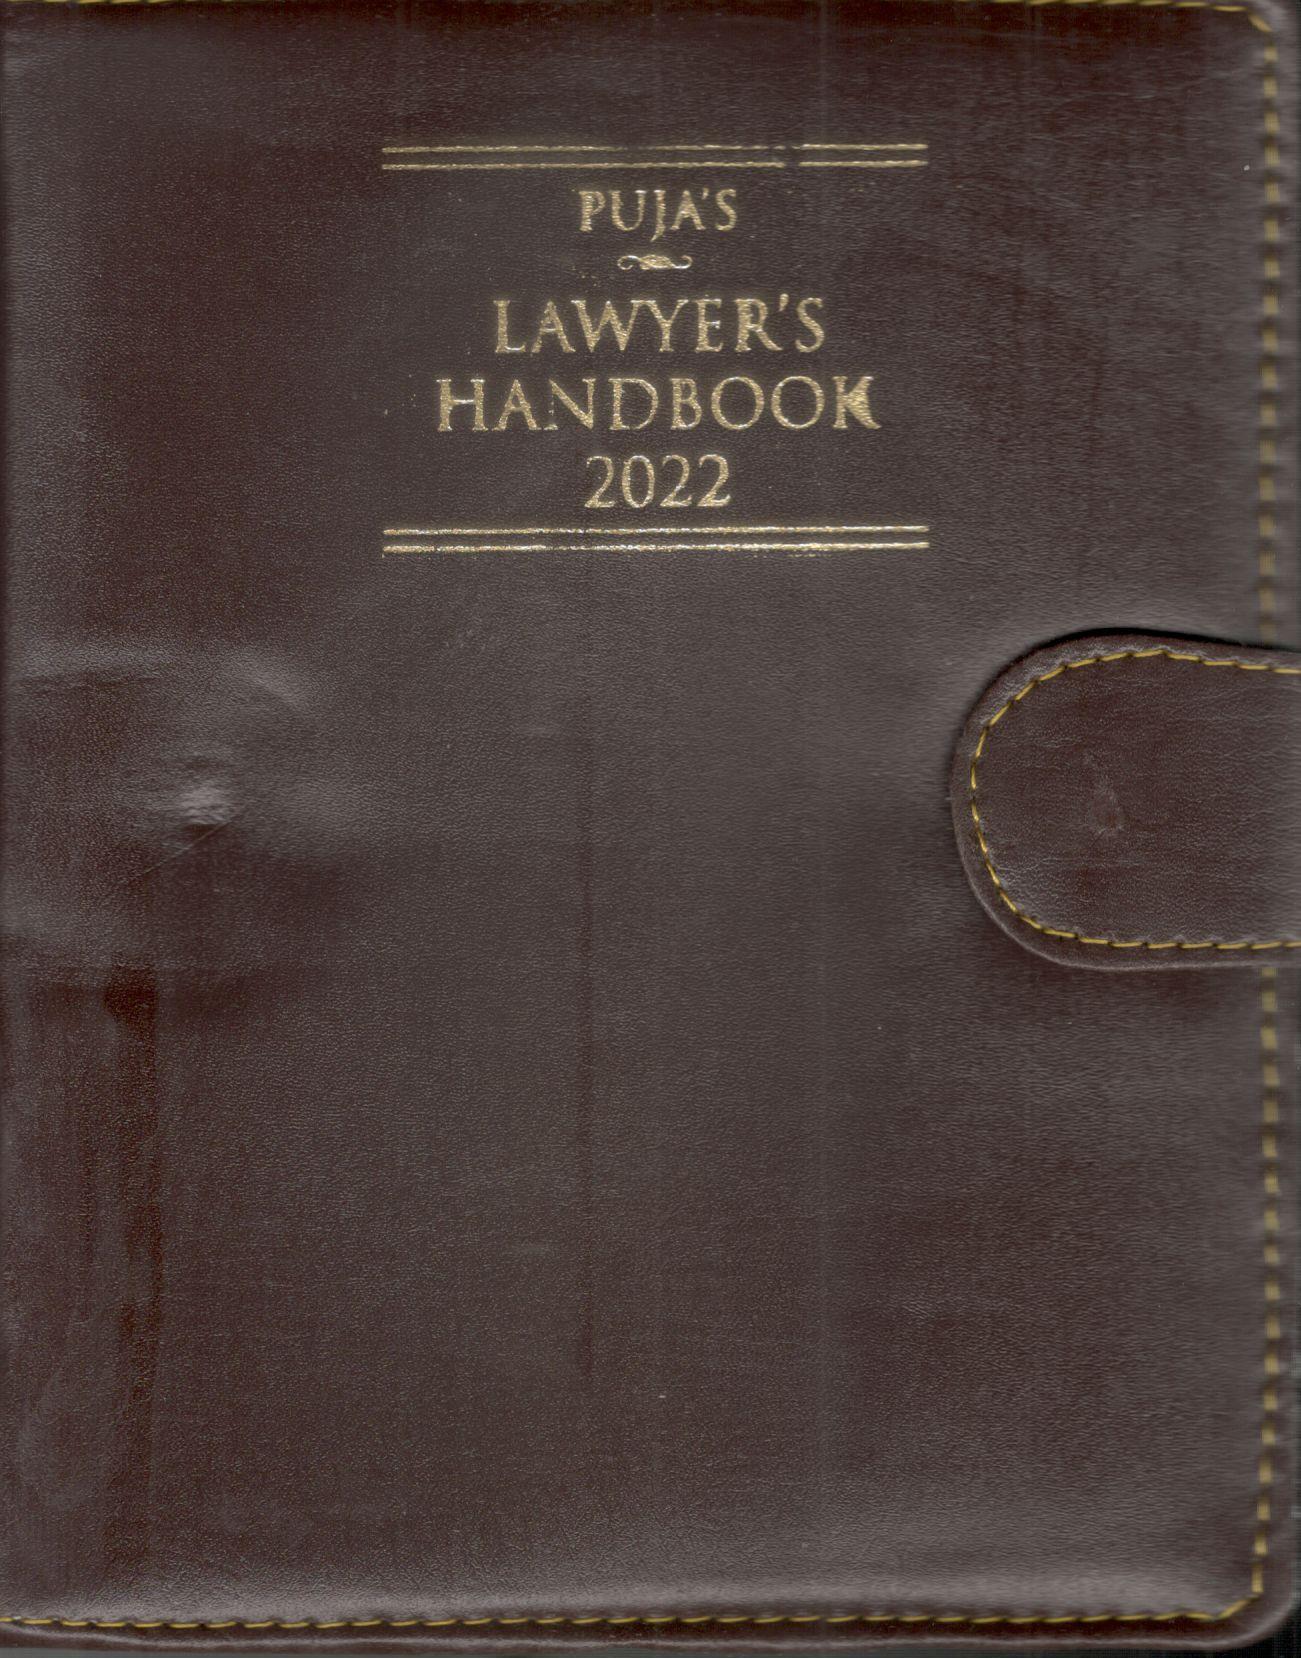 Puja’s Lawyer’s Handbook 2022 - Brown Executive small Size with Button